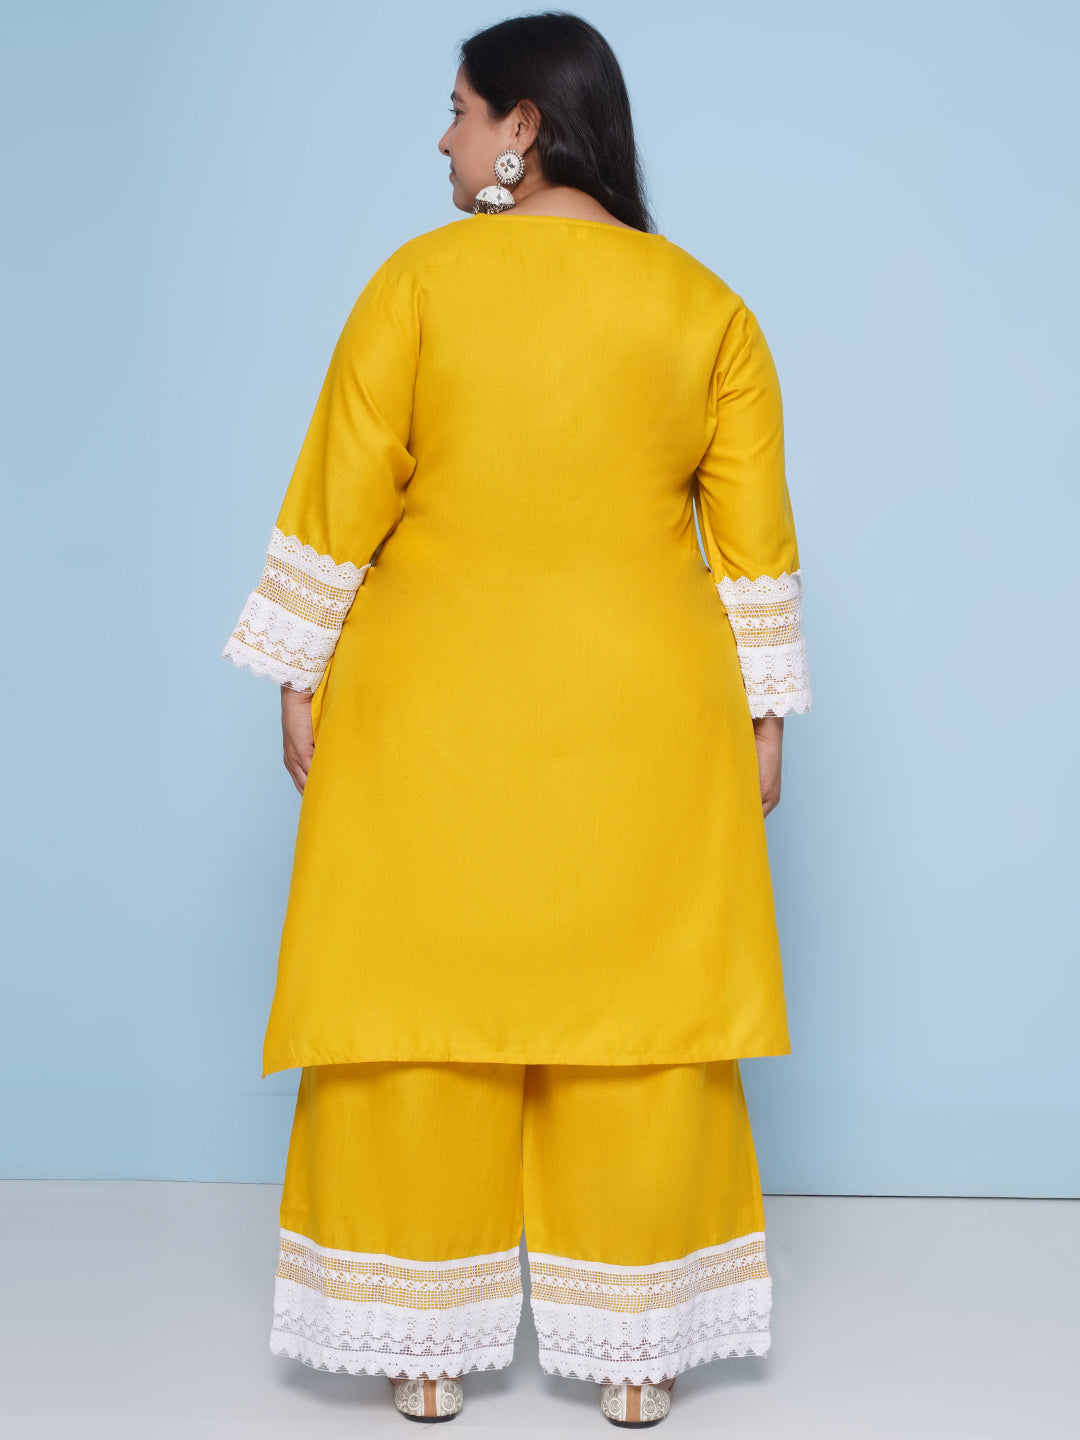 Yellow color kurta with lace detailing on sleeves and neck